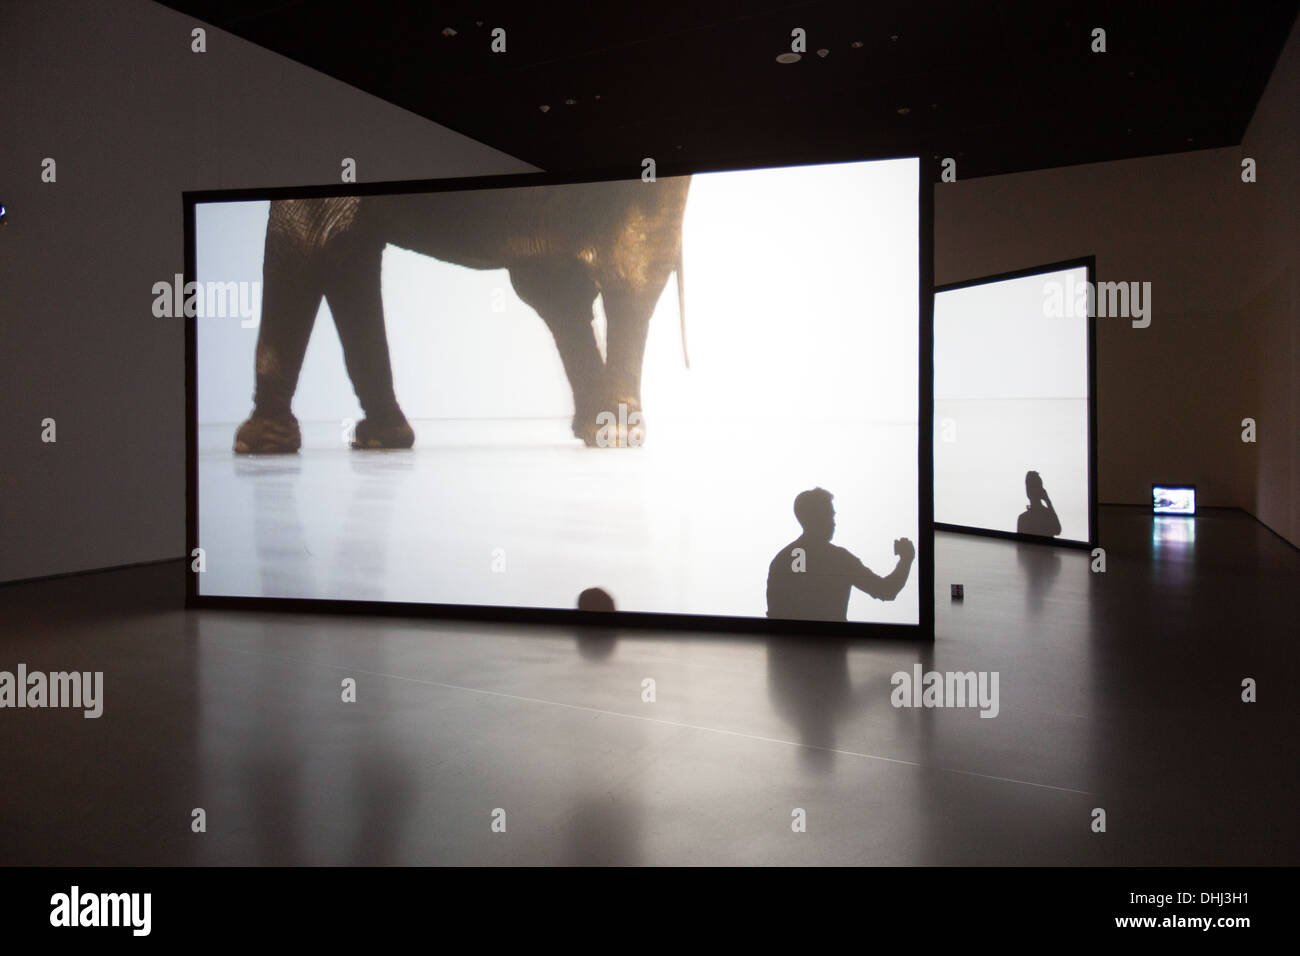 Douglas Gordon's Play Dead: Real Time on display at the Museum Of Modern Art, New York City, United States of America Stock Photo